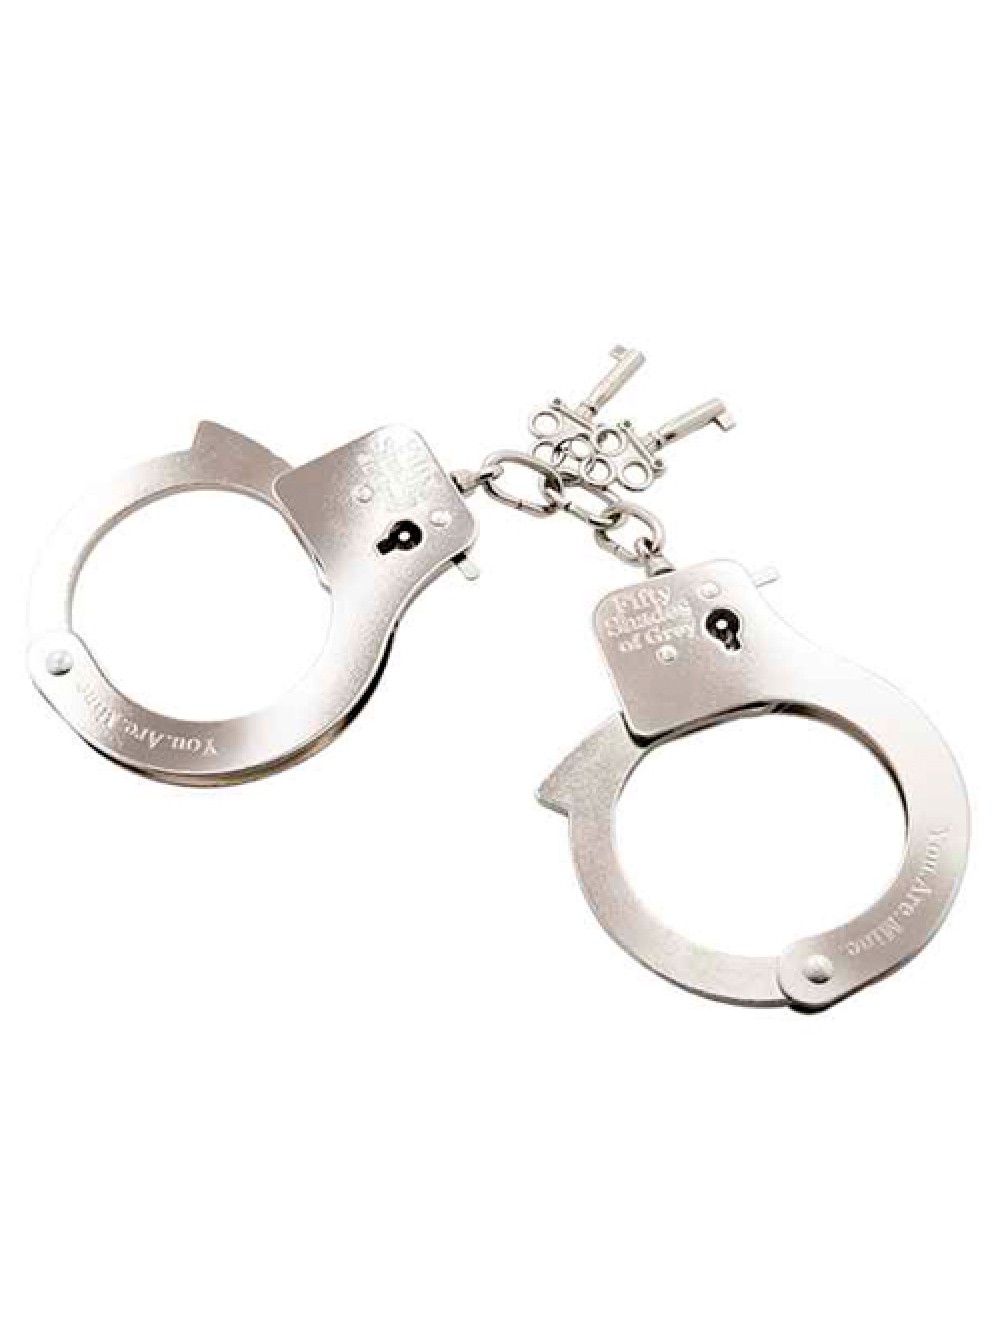 You are Mine - Metal Handcuffs 5060108819688